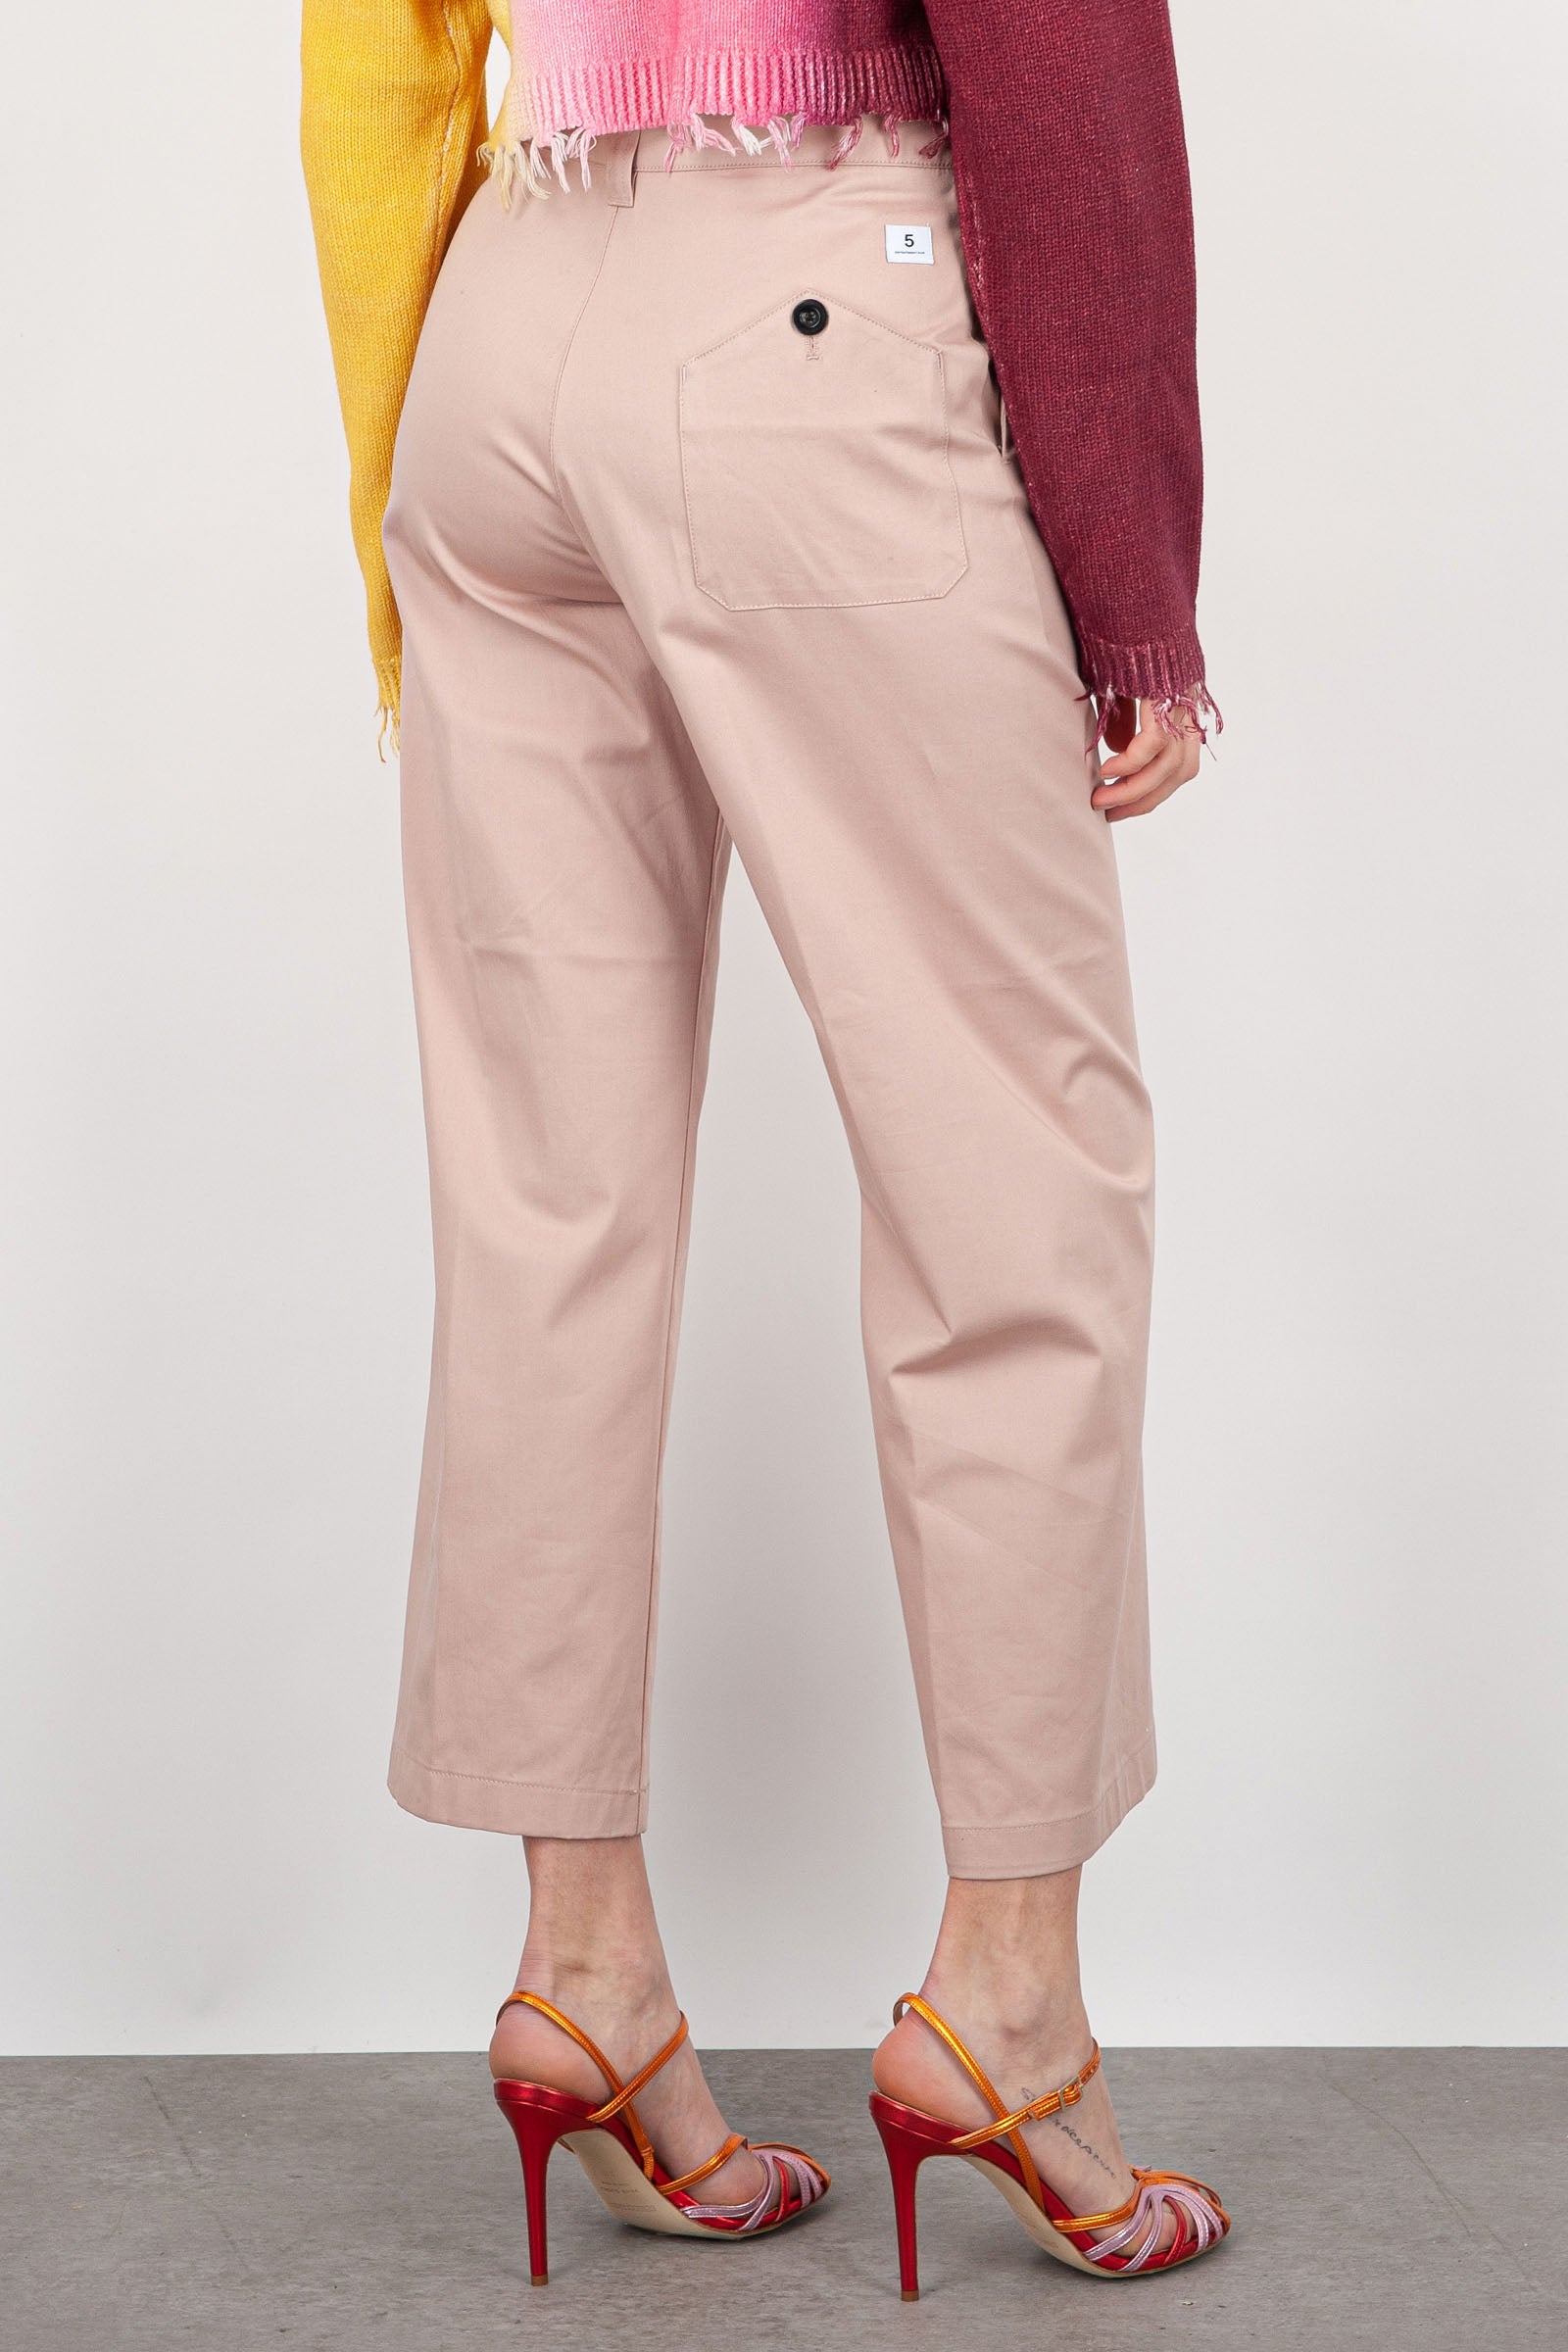 Department Five Crop Trousers Side No Cotton Light Pink - 5